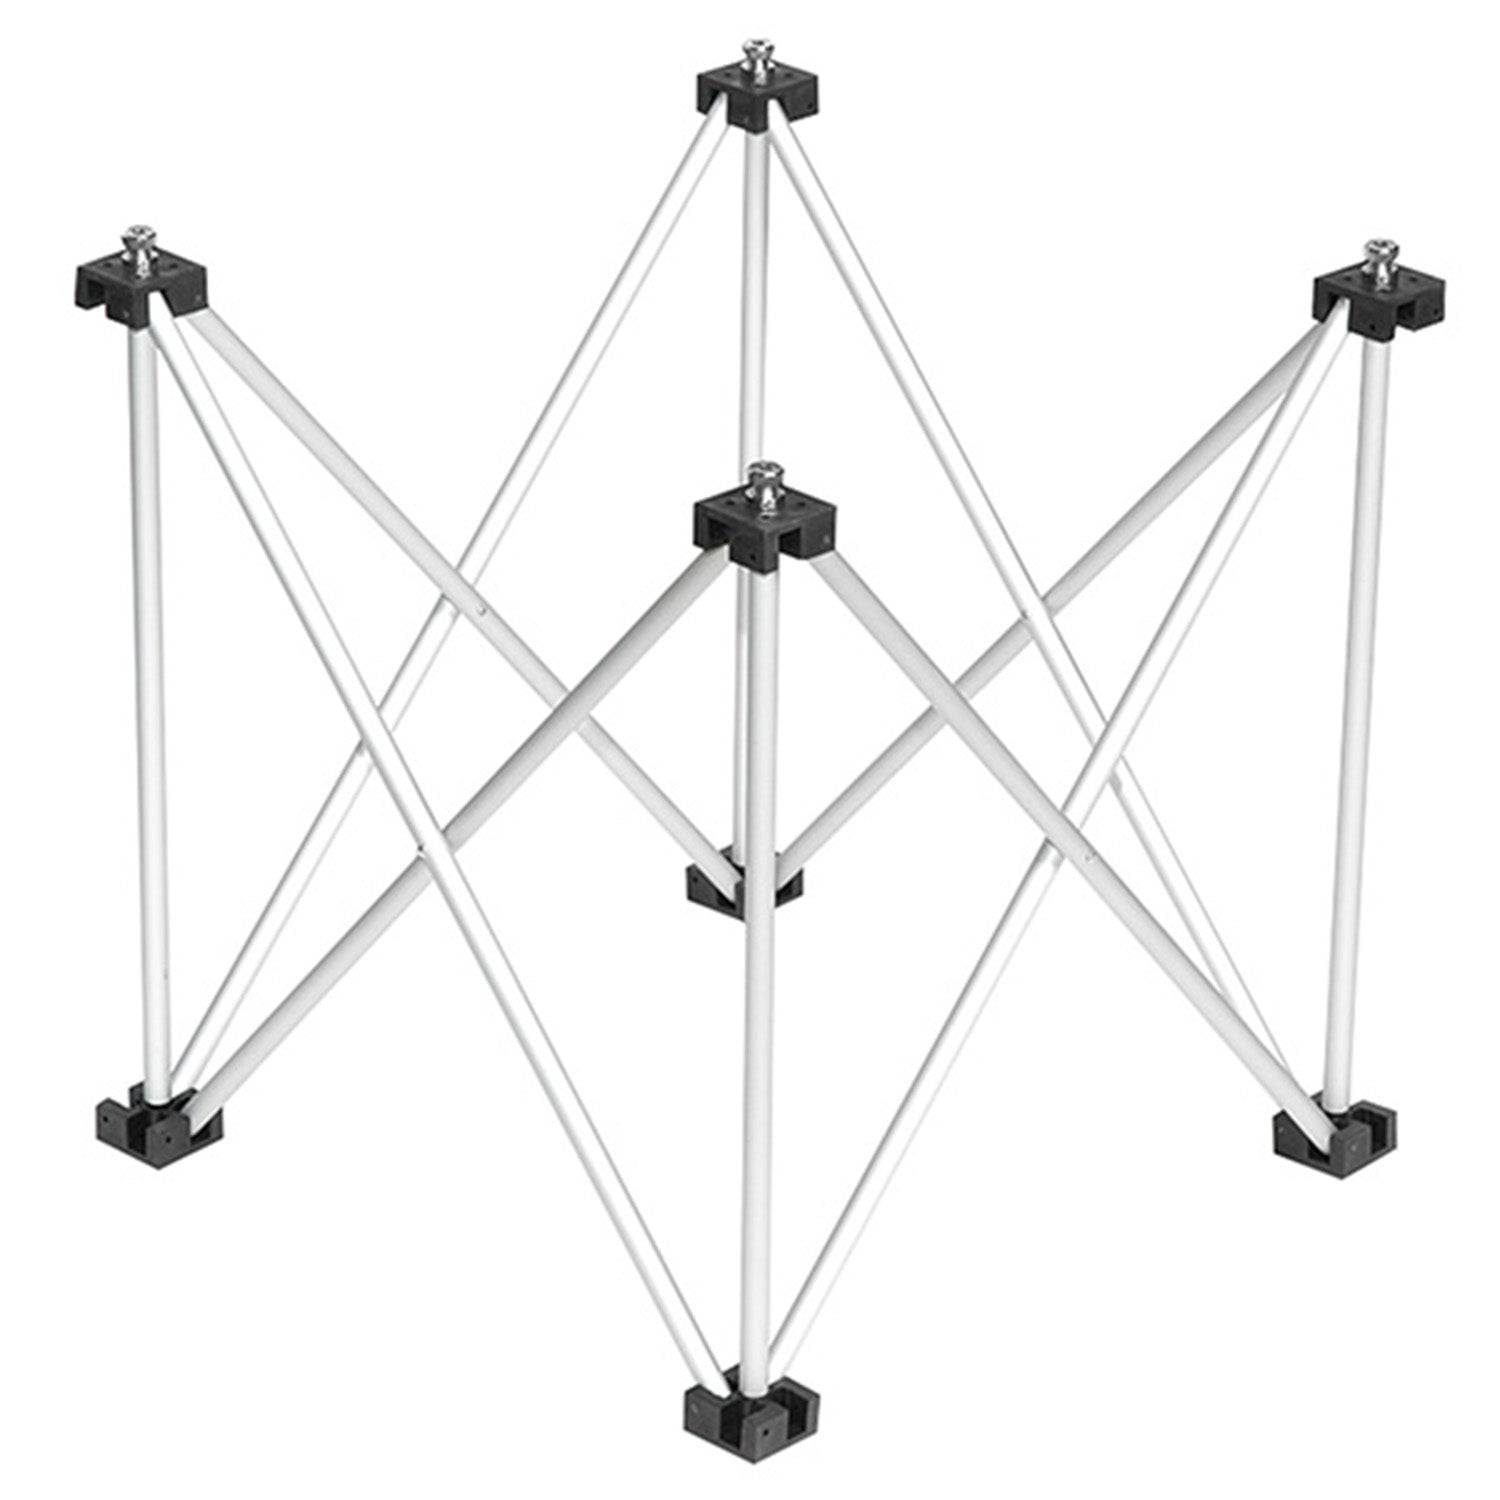 Intellistage ISIT4X32, 32 Inches High Riser for 4 Feet 90 Degree Right Triangle Folding Stage Platform - Hollywood DJ